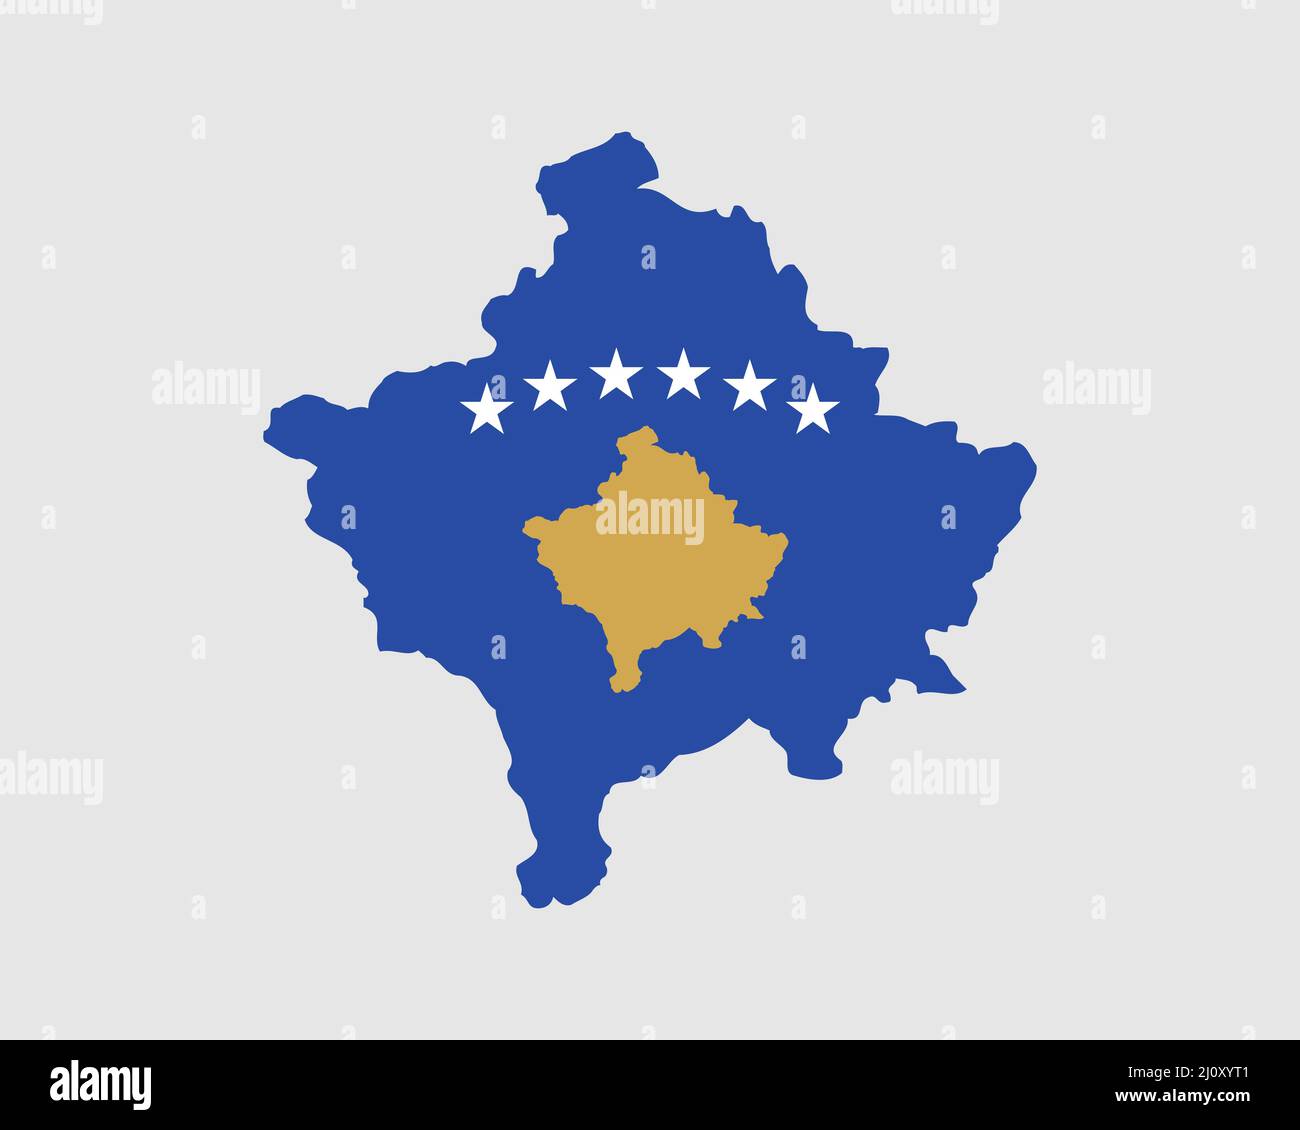 Kosovo Map Flag. Map of the Republic of Kosovo with country banner. Kosovar Kosovan Map Flag Vector Illustration. Stock Vector